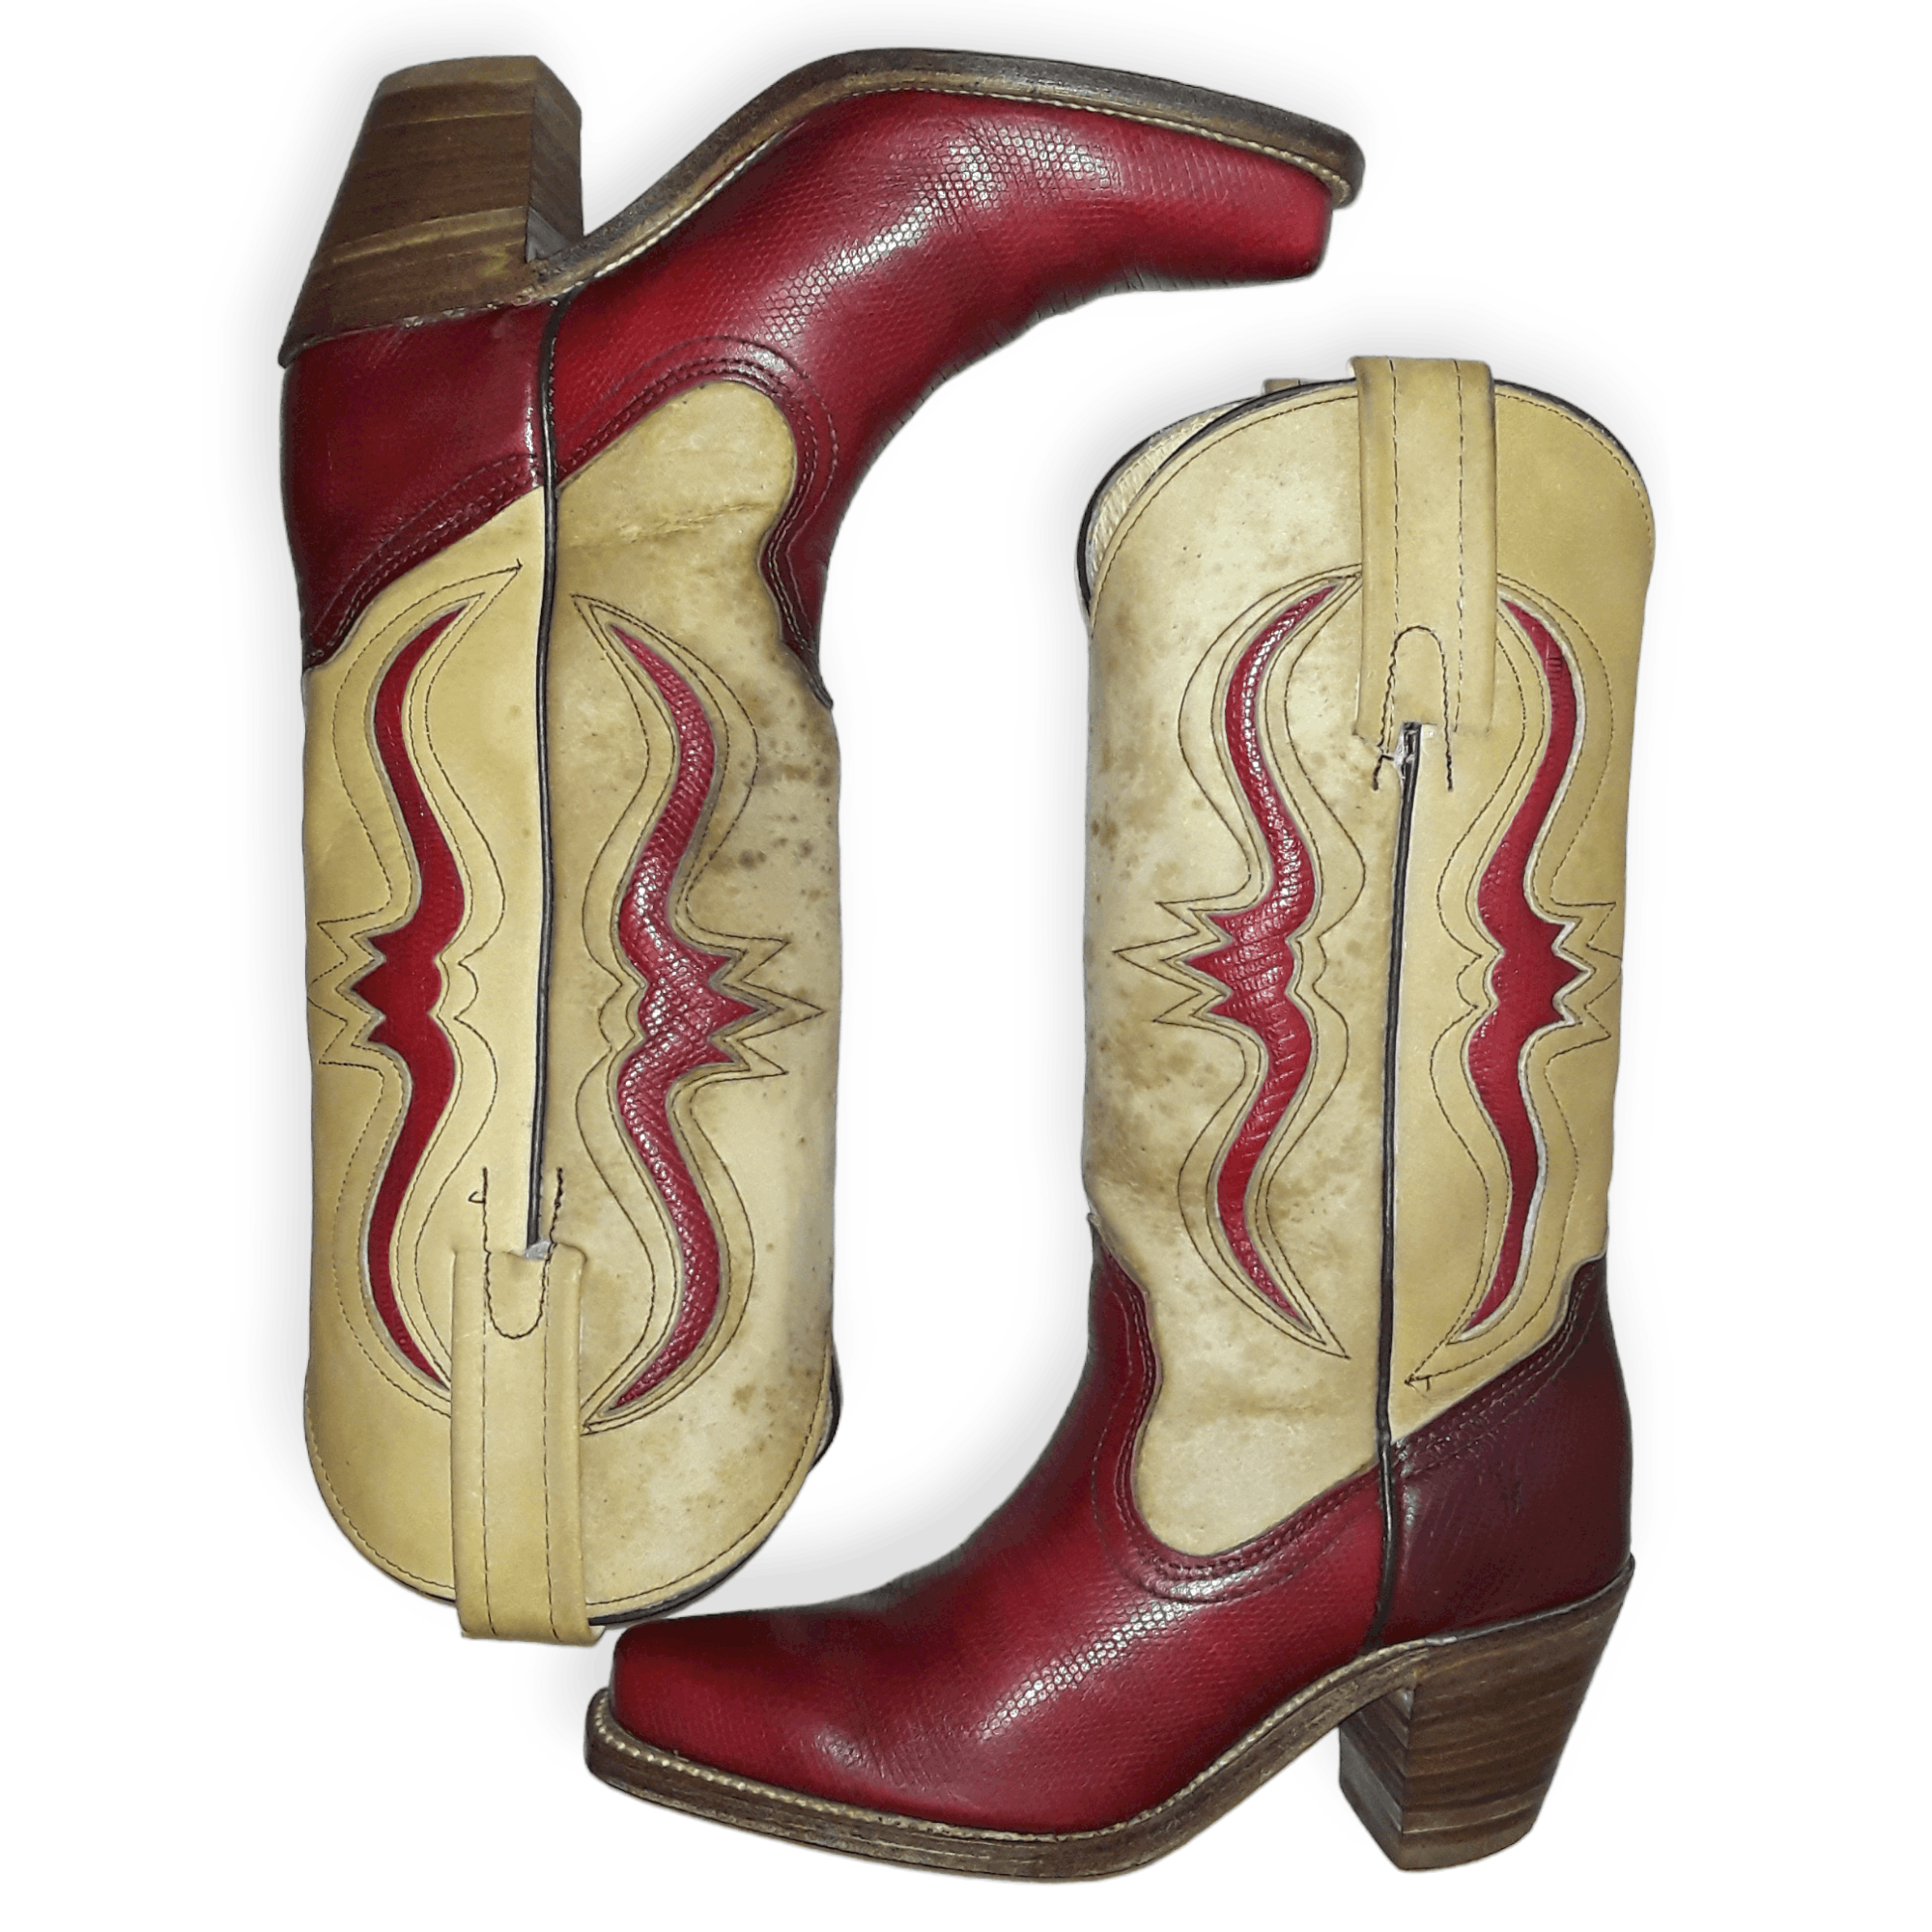 Vintage Vtg Frye Leather Cowgirl Western Boots Size 5.5 B USA Made Size US 5.5 / IT 35.5 - 2 Preview